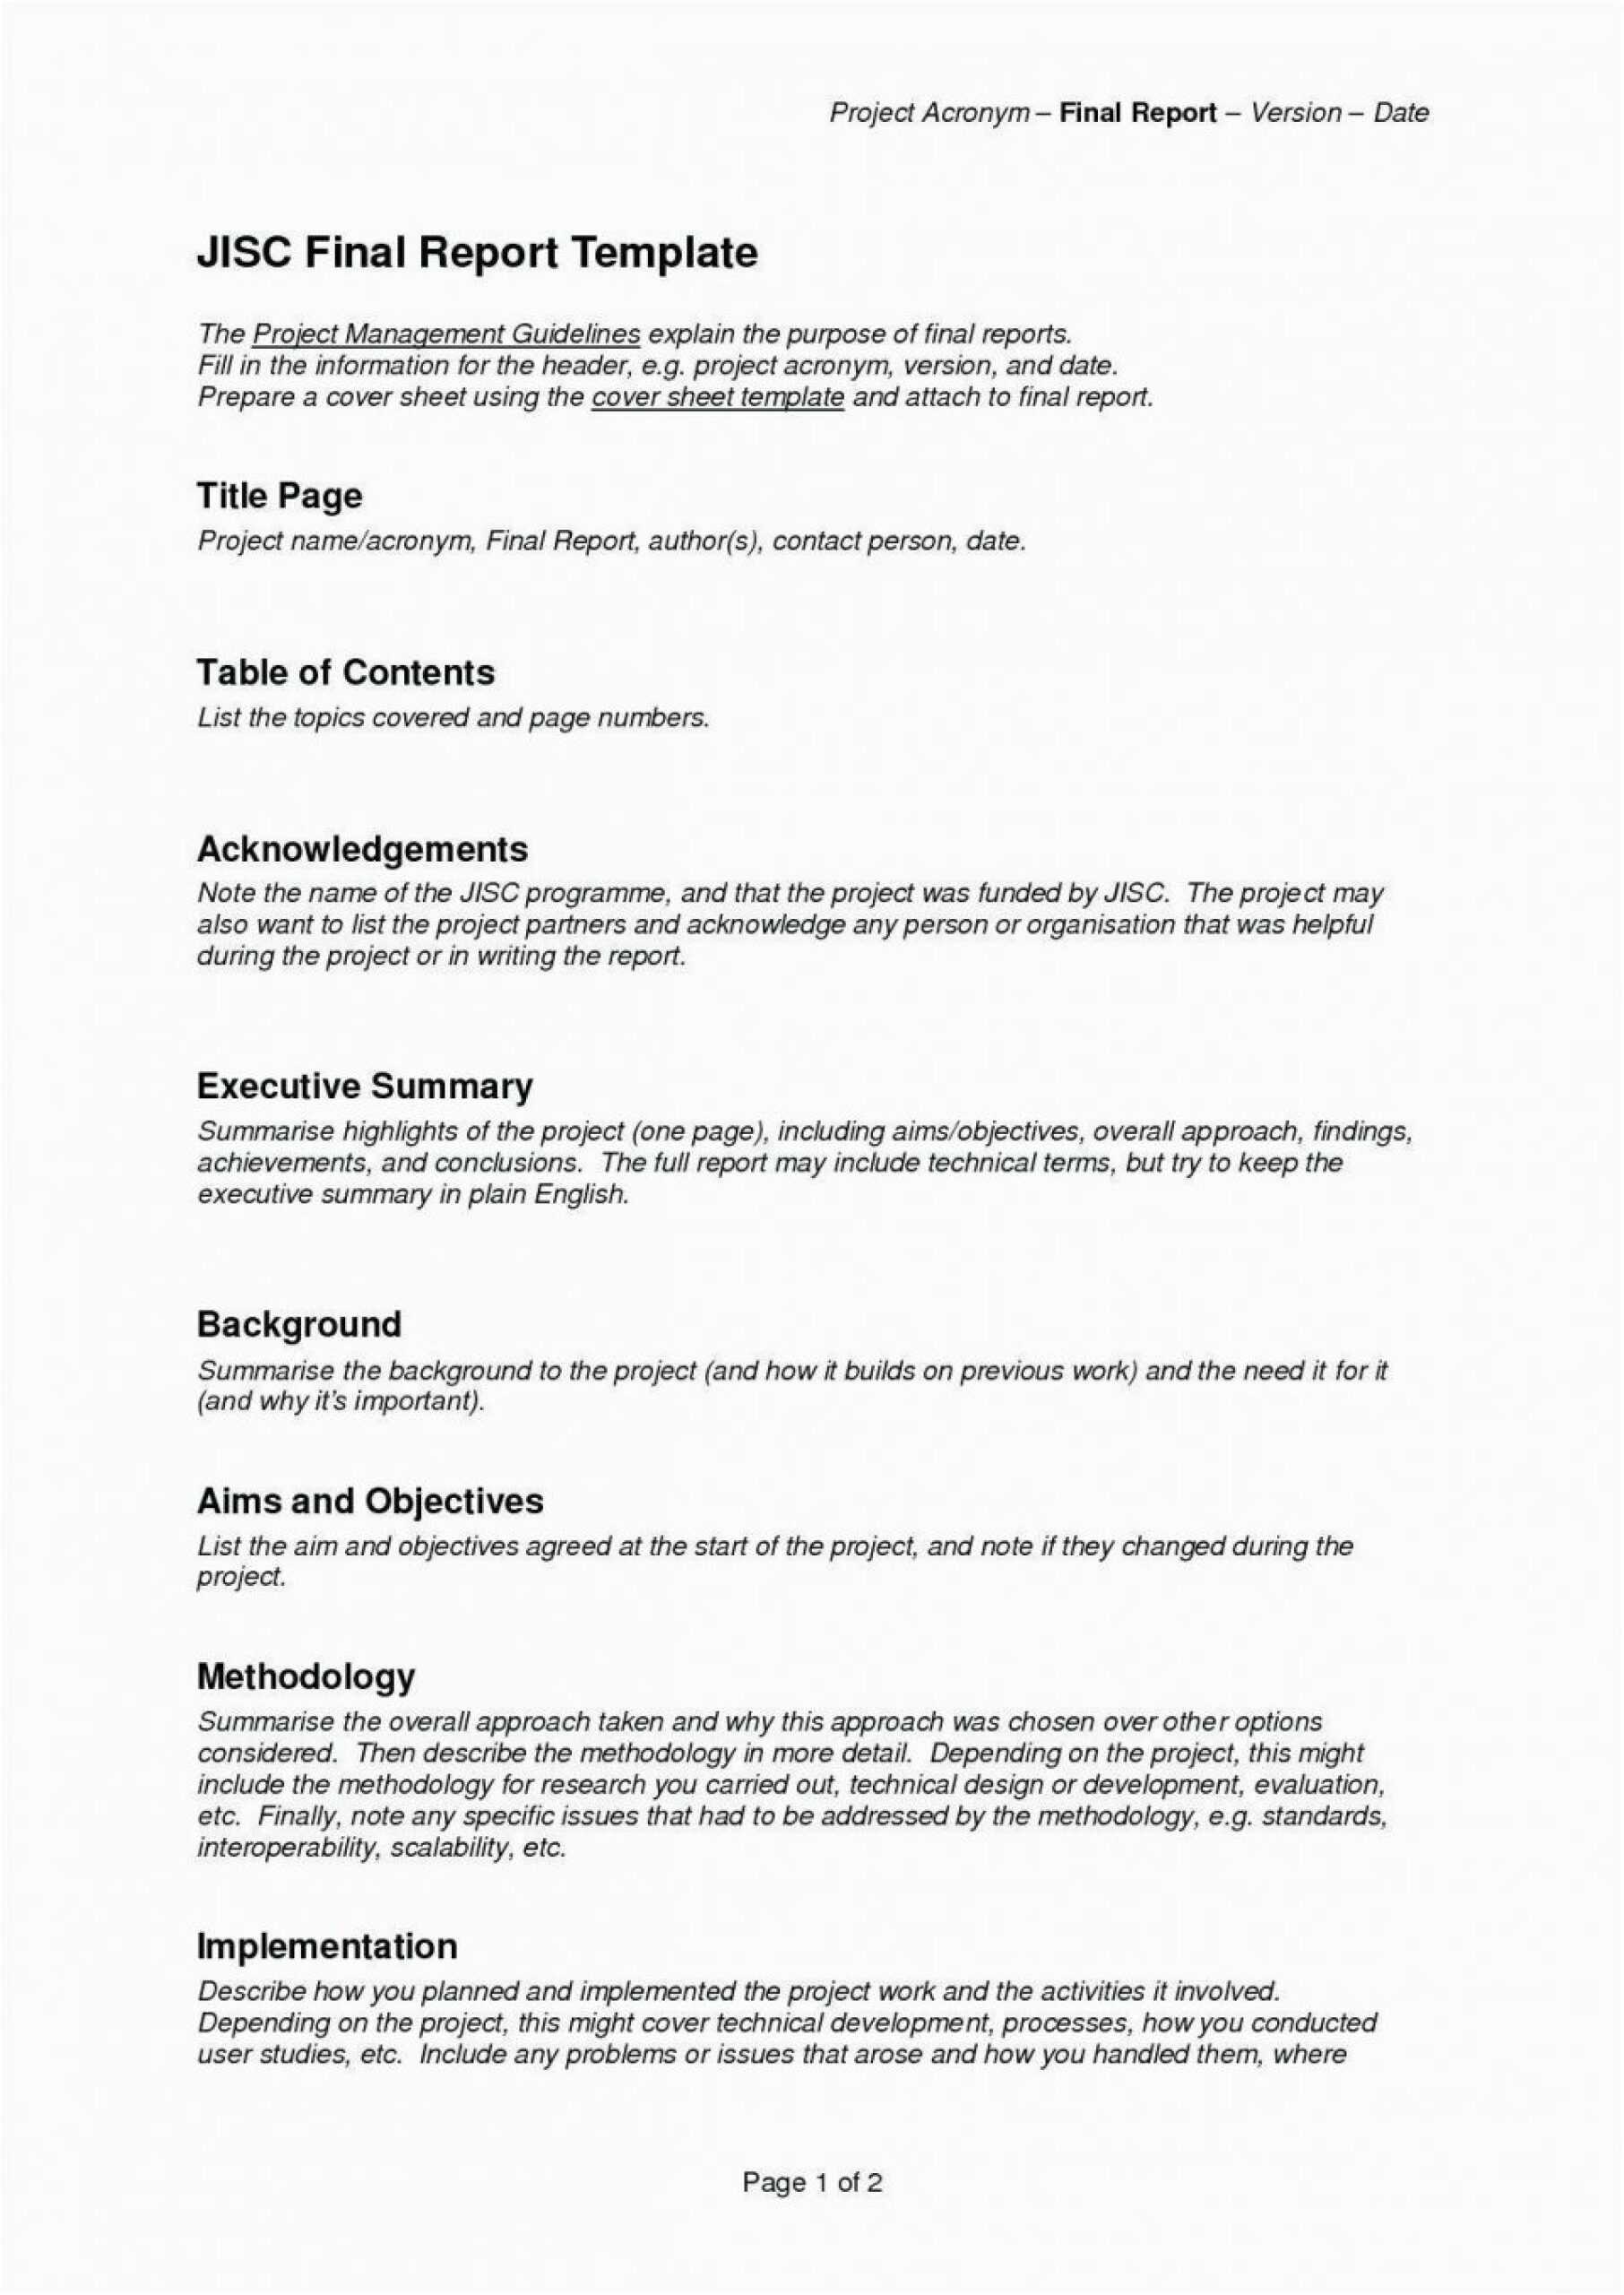 017 Execagesumreport Project Management Executive Summary With Evaluation Summary Report Template